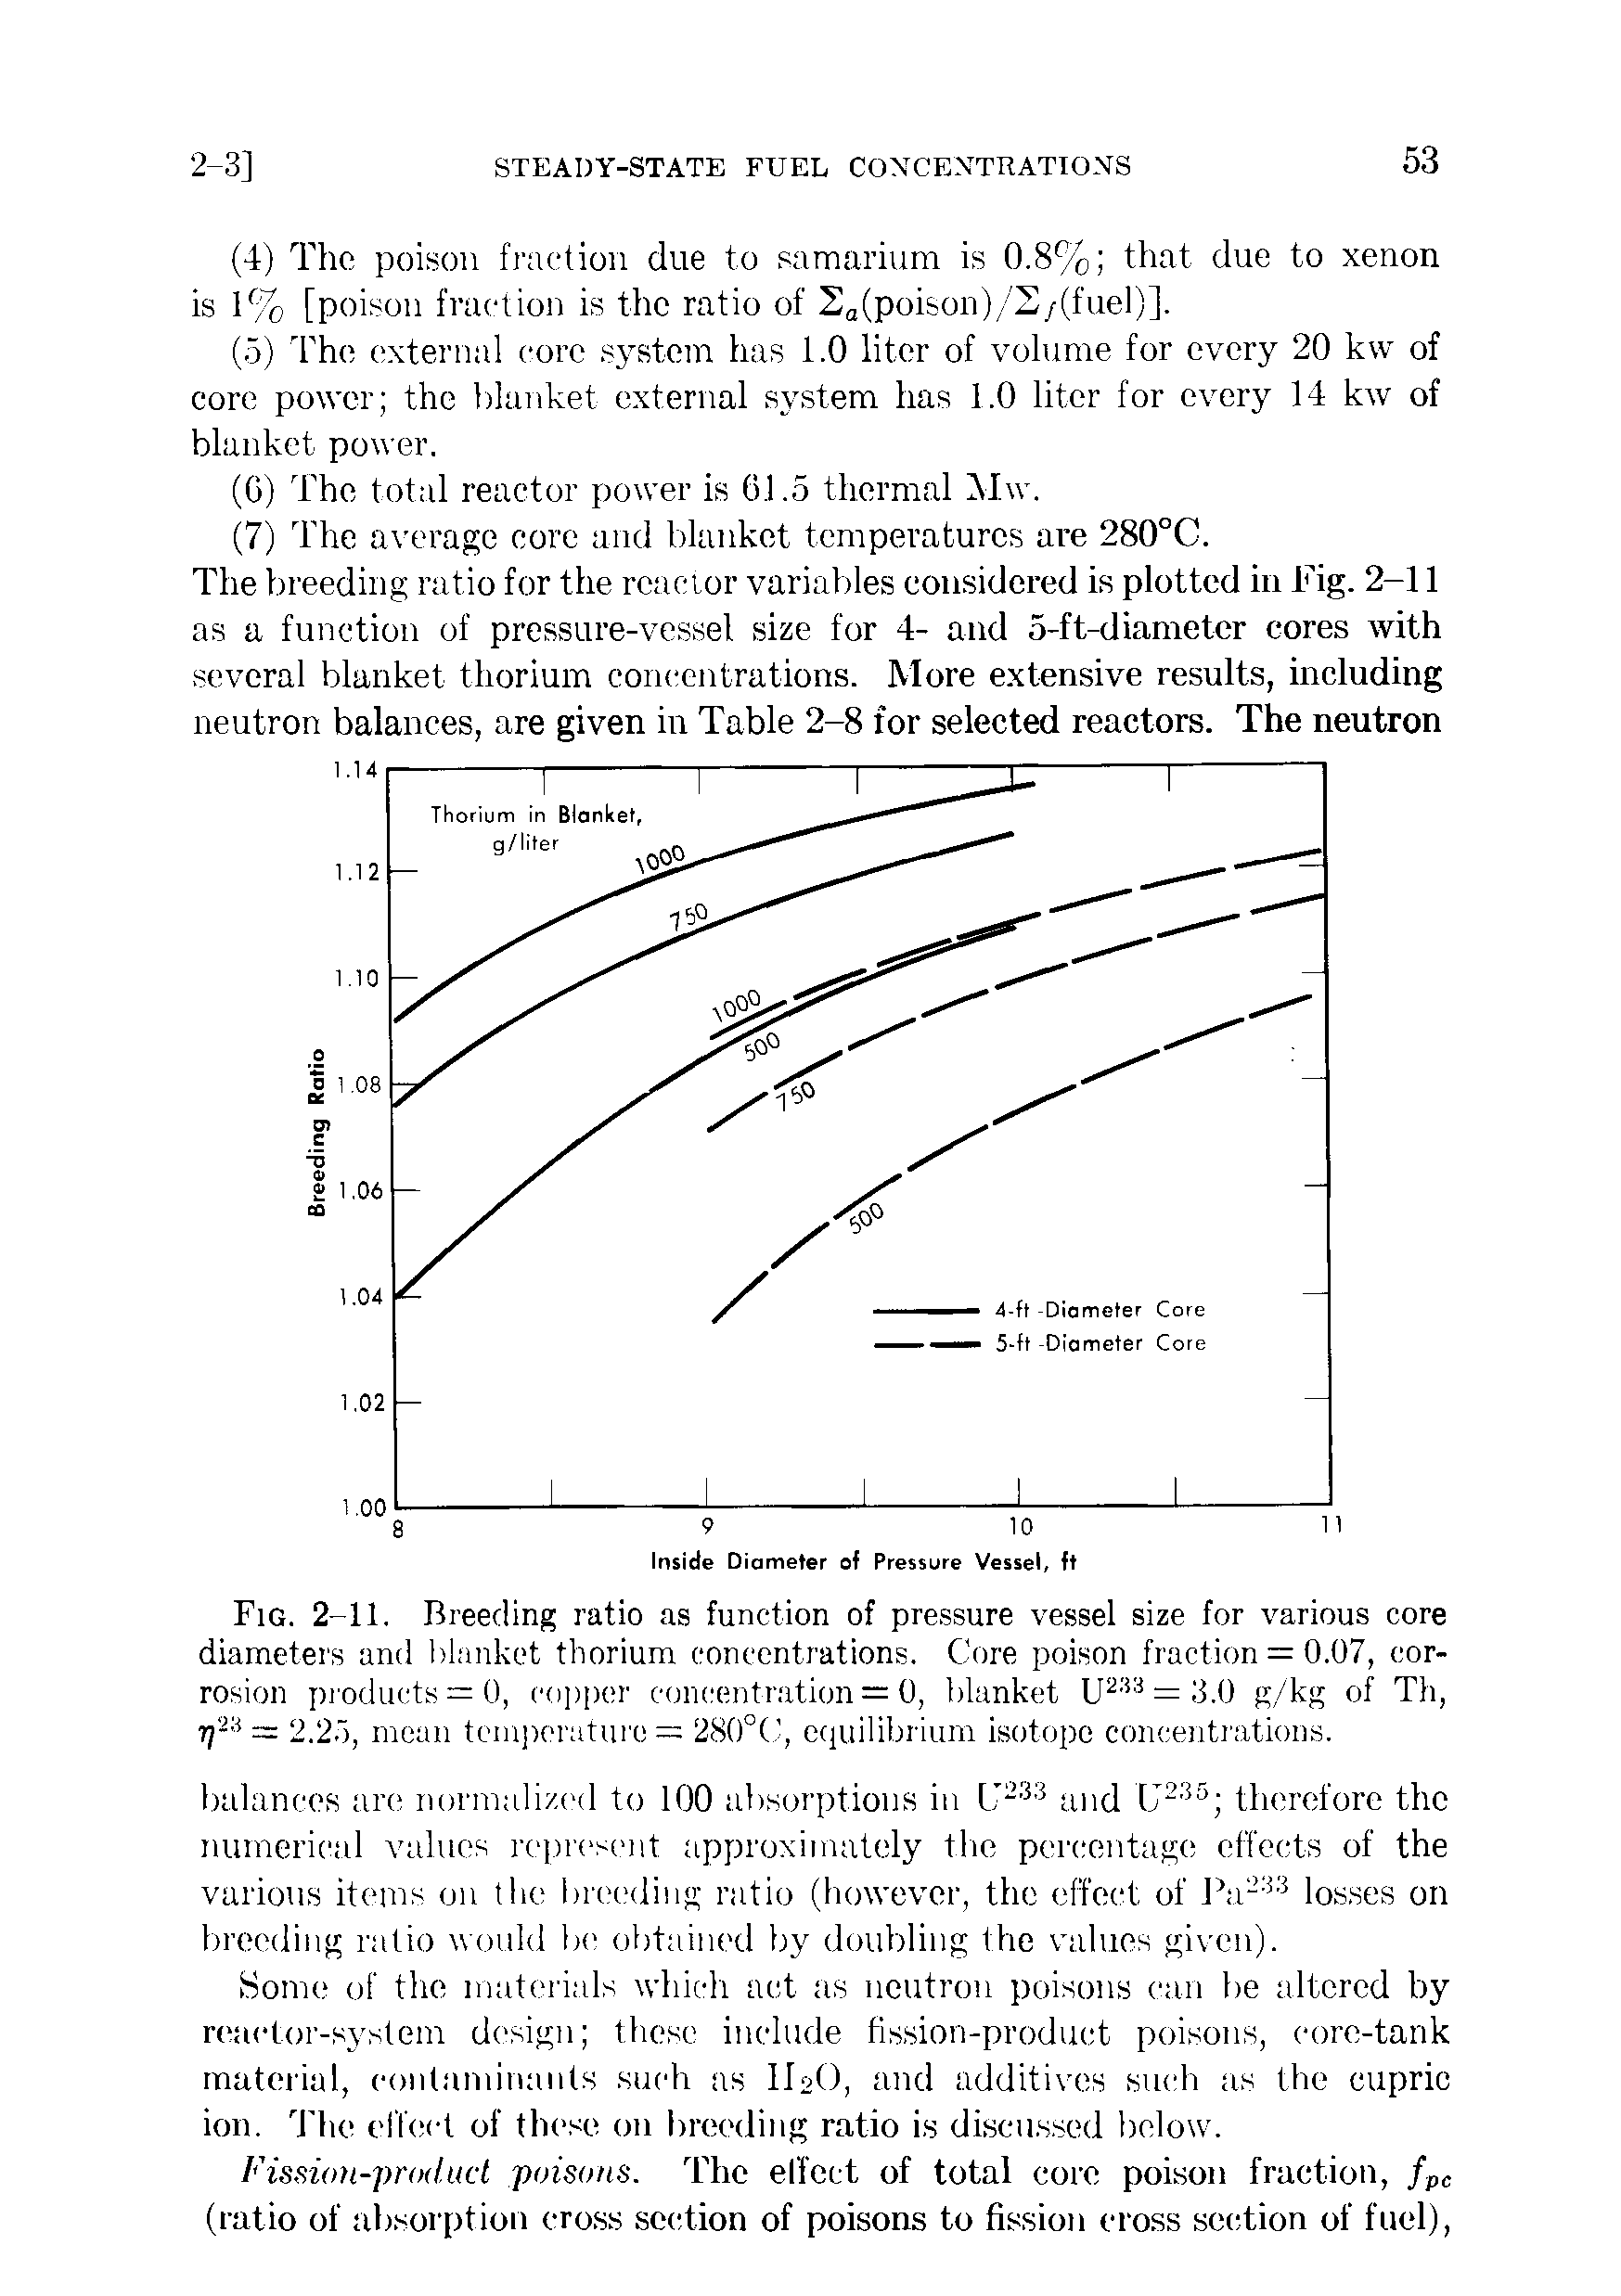 Fig. 2-11. Breeding ratio as function of pre.ssure vessel size for various core diameters and blanket thorium concentrations. Core poison fraction = 0.07, corrosion products = 0, co])per concentration = 0, blanket U = 3.0 g/kg of Th, = 2.2"), mean temi)cratui e = 280°C, cciuilibrium isotope concentrations.